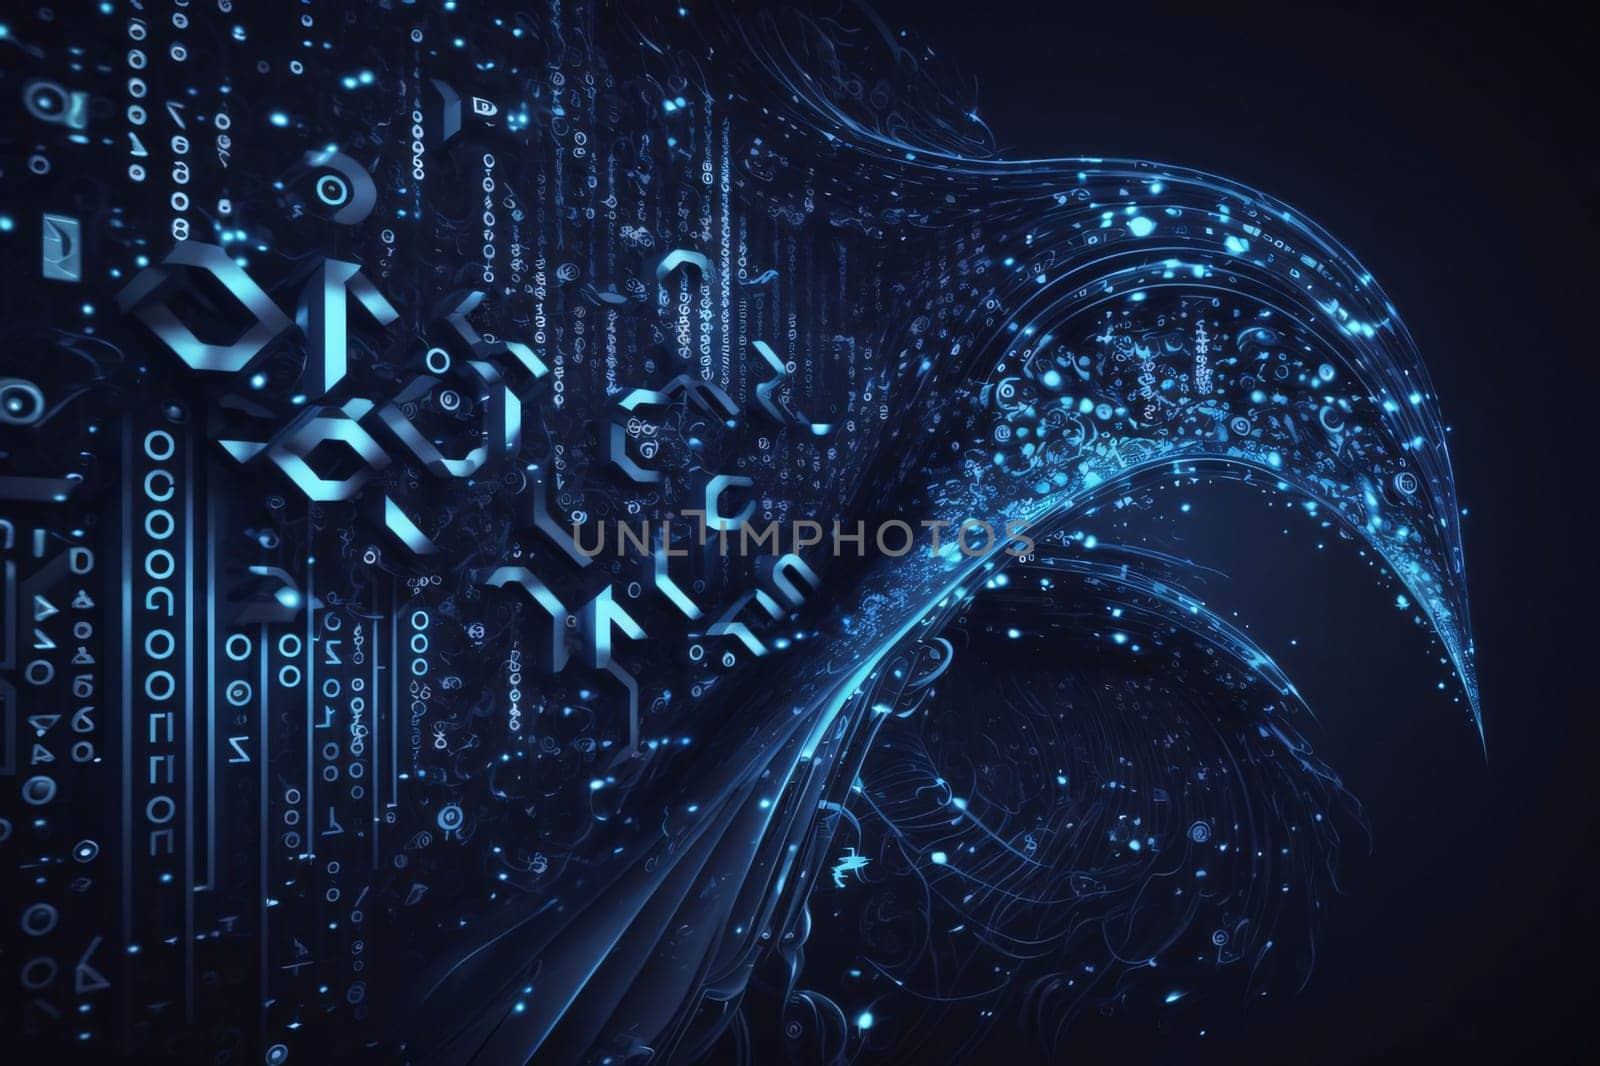 Abstract technology background with circuit board, blue toned. Vector illustration by ThemesS